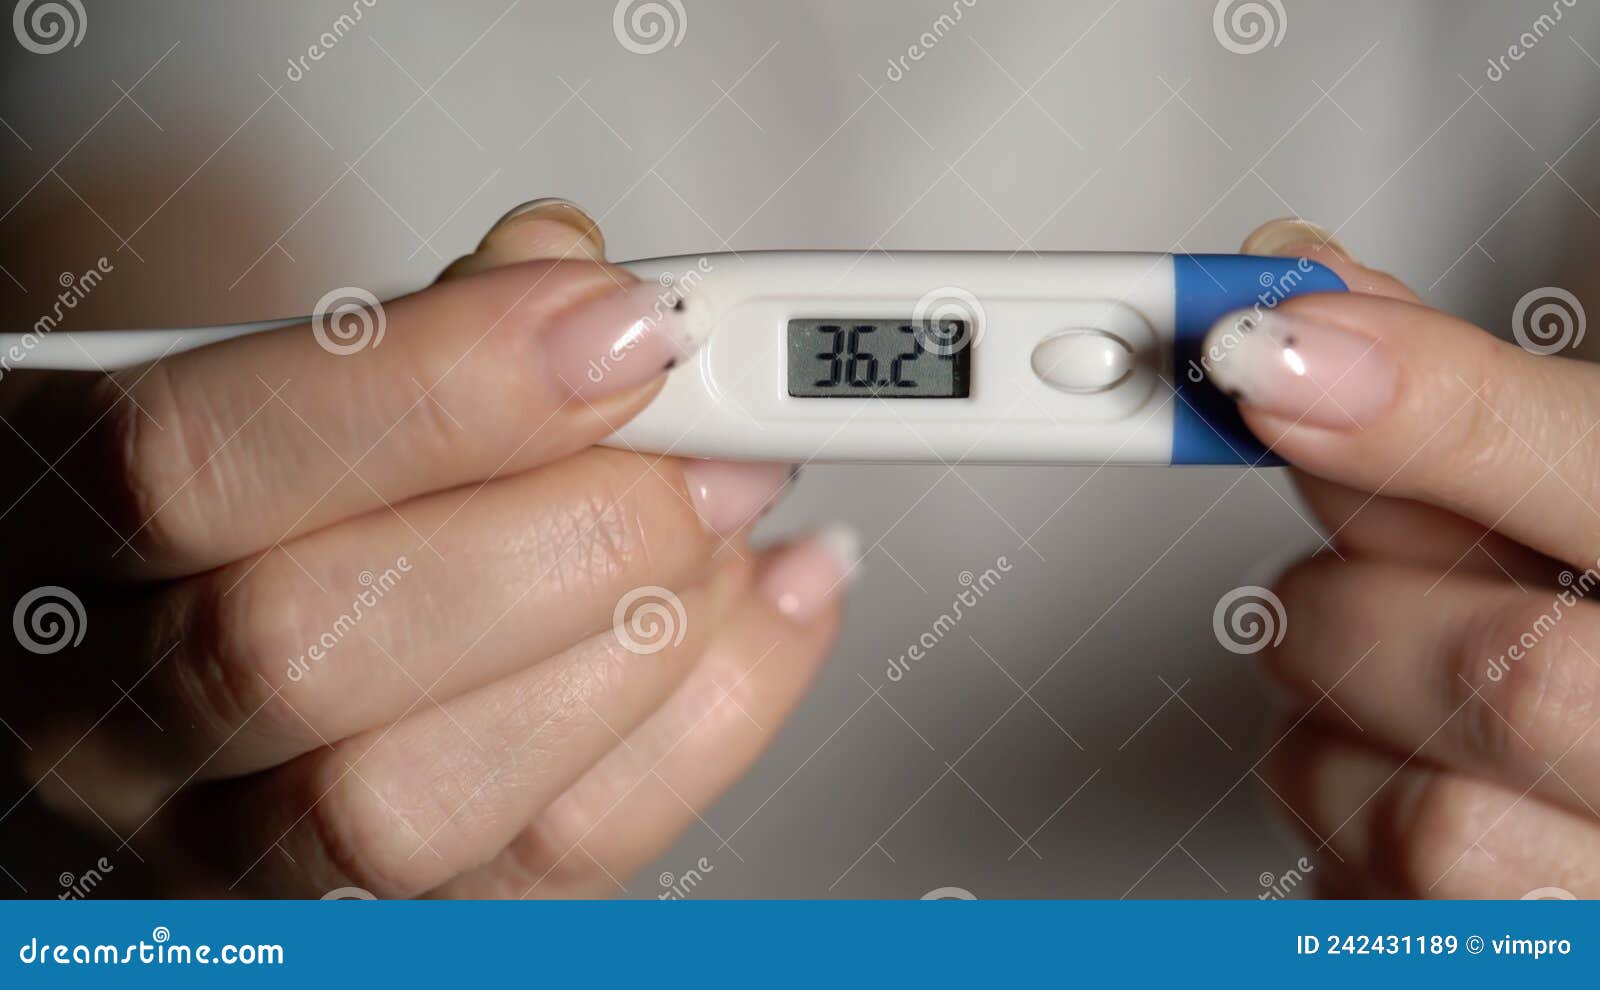 Woman Holds Thermometer in Hands To Measure Body Temperature. 36